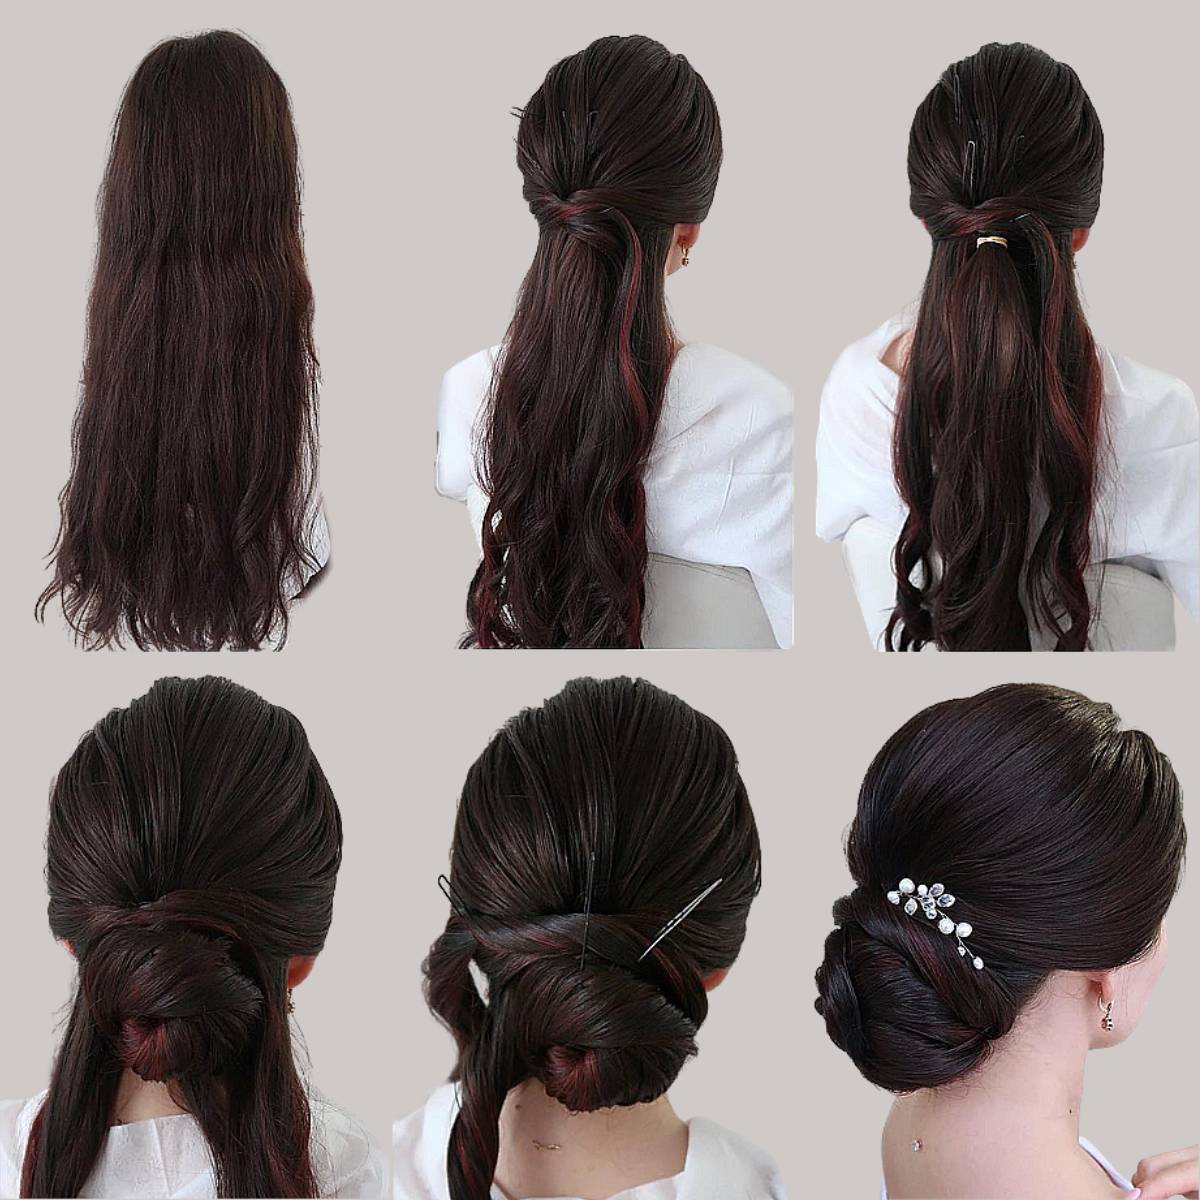 How to Use a Hair Pin for Updo Hairstyles - L'Oréal Paris